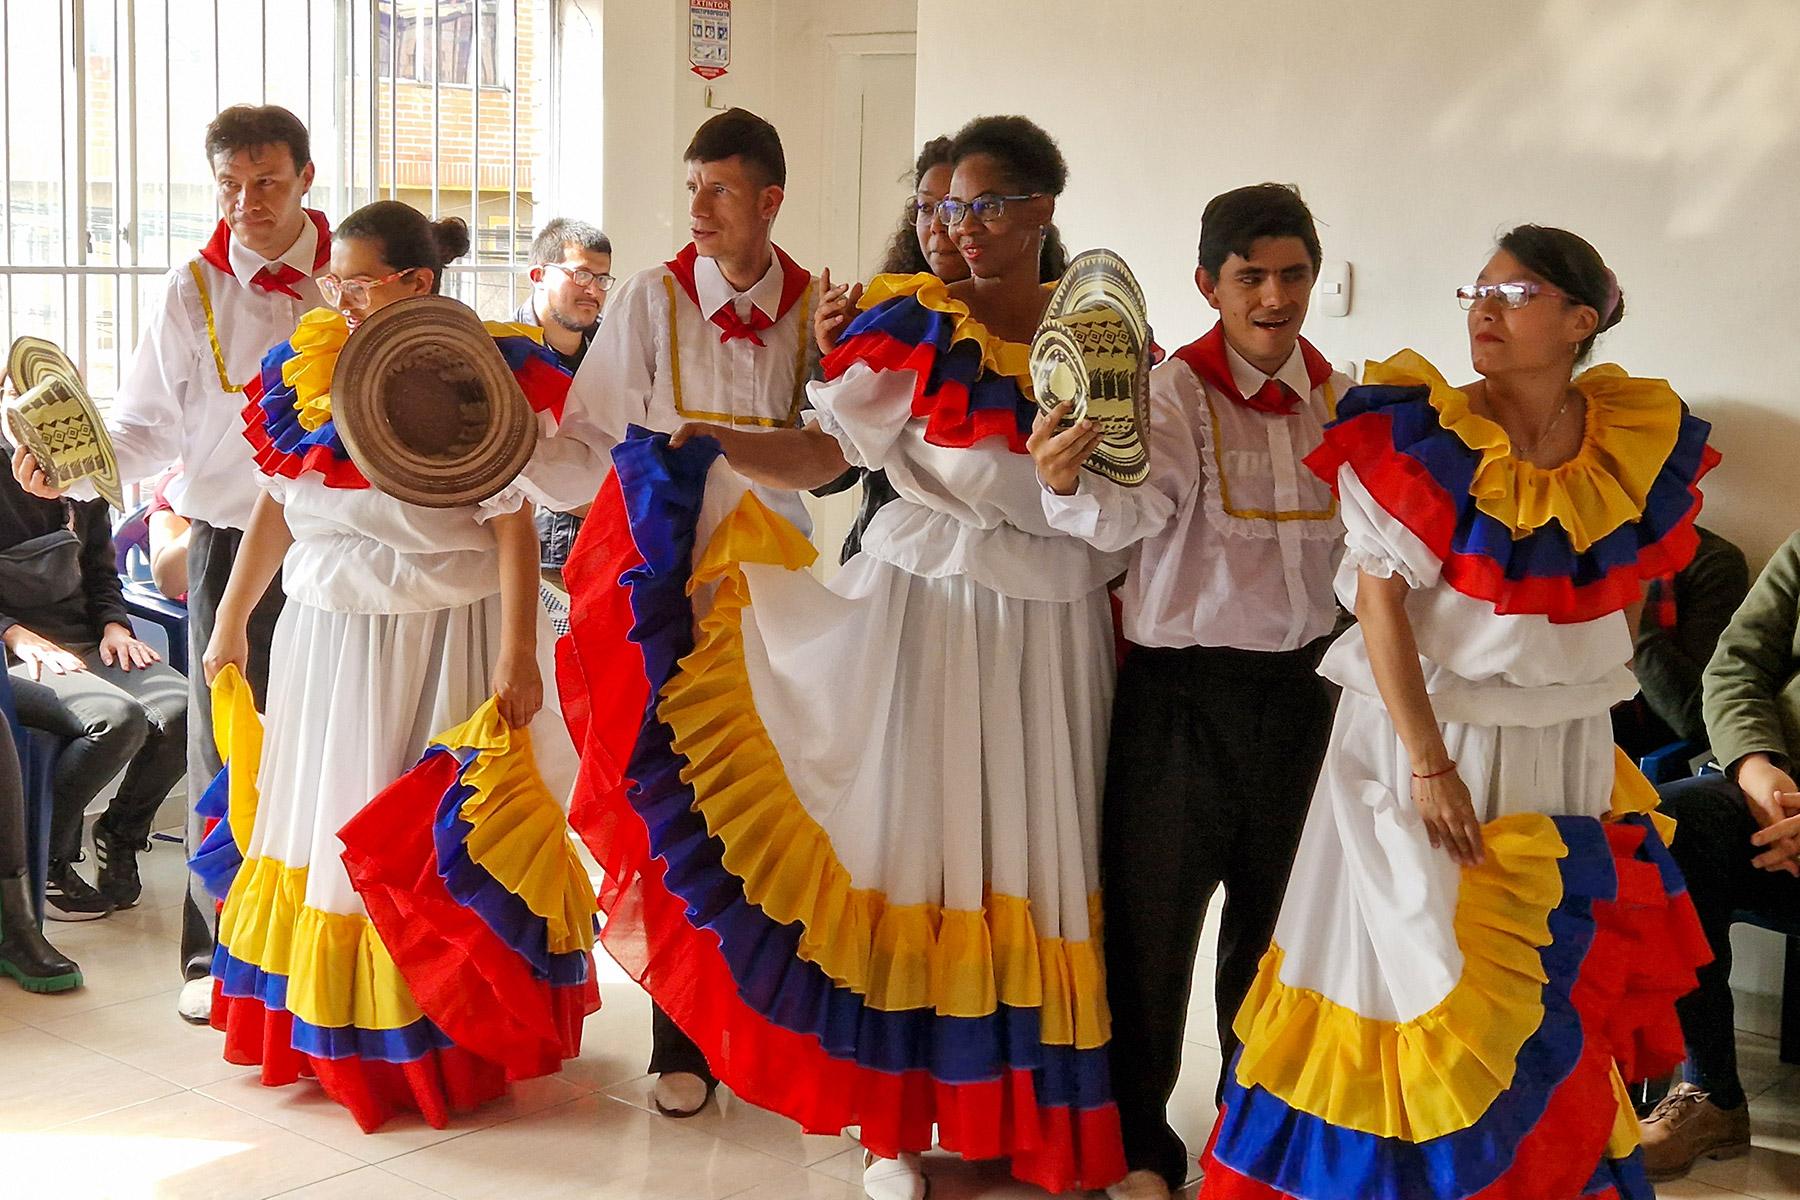 At the True Vine Integral Training Centre (La Vid Verdadera) a group of people with hearing or mental disabilities proudly presents a traditional Colombian dance to the visitors from the LWF Pre-Assembly. Photo: LWF/A. Weyermüller